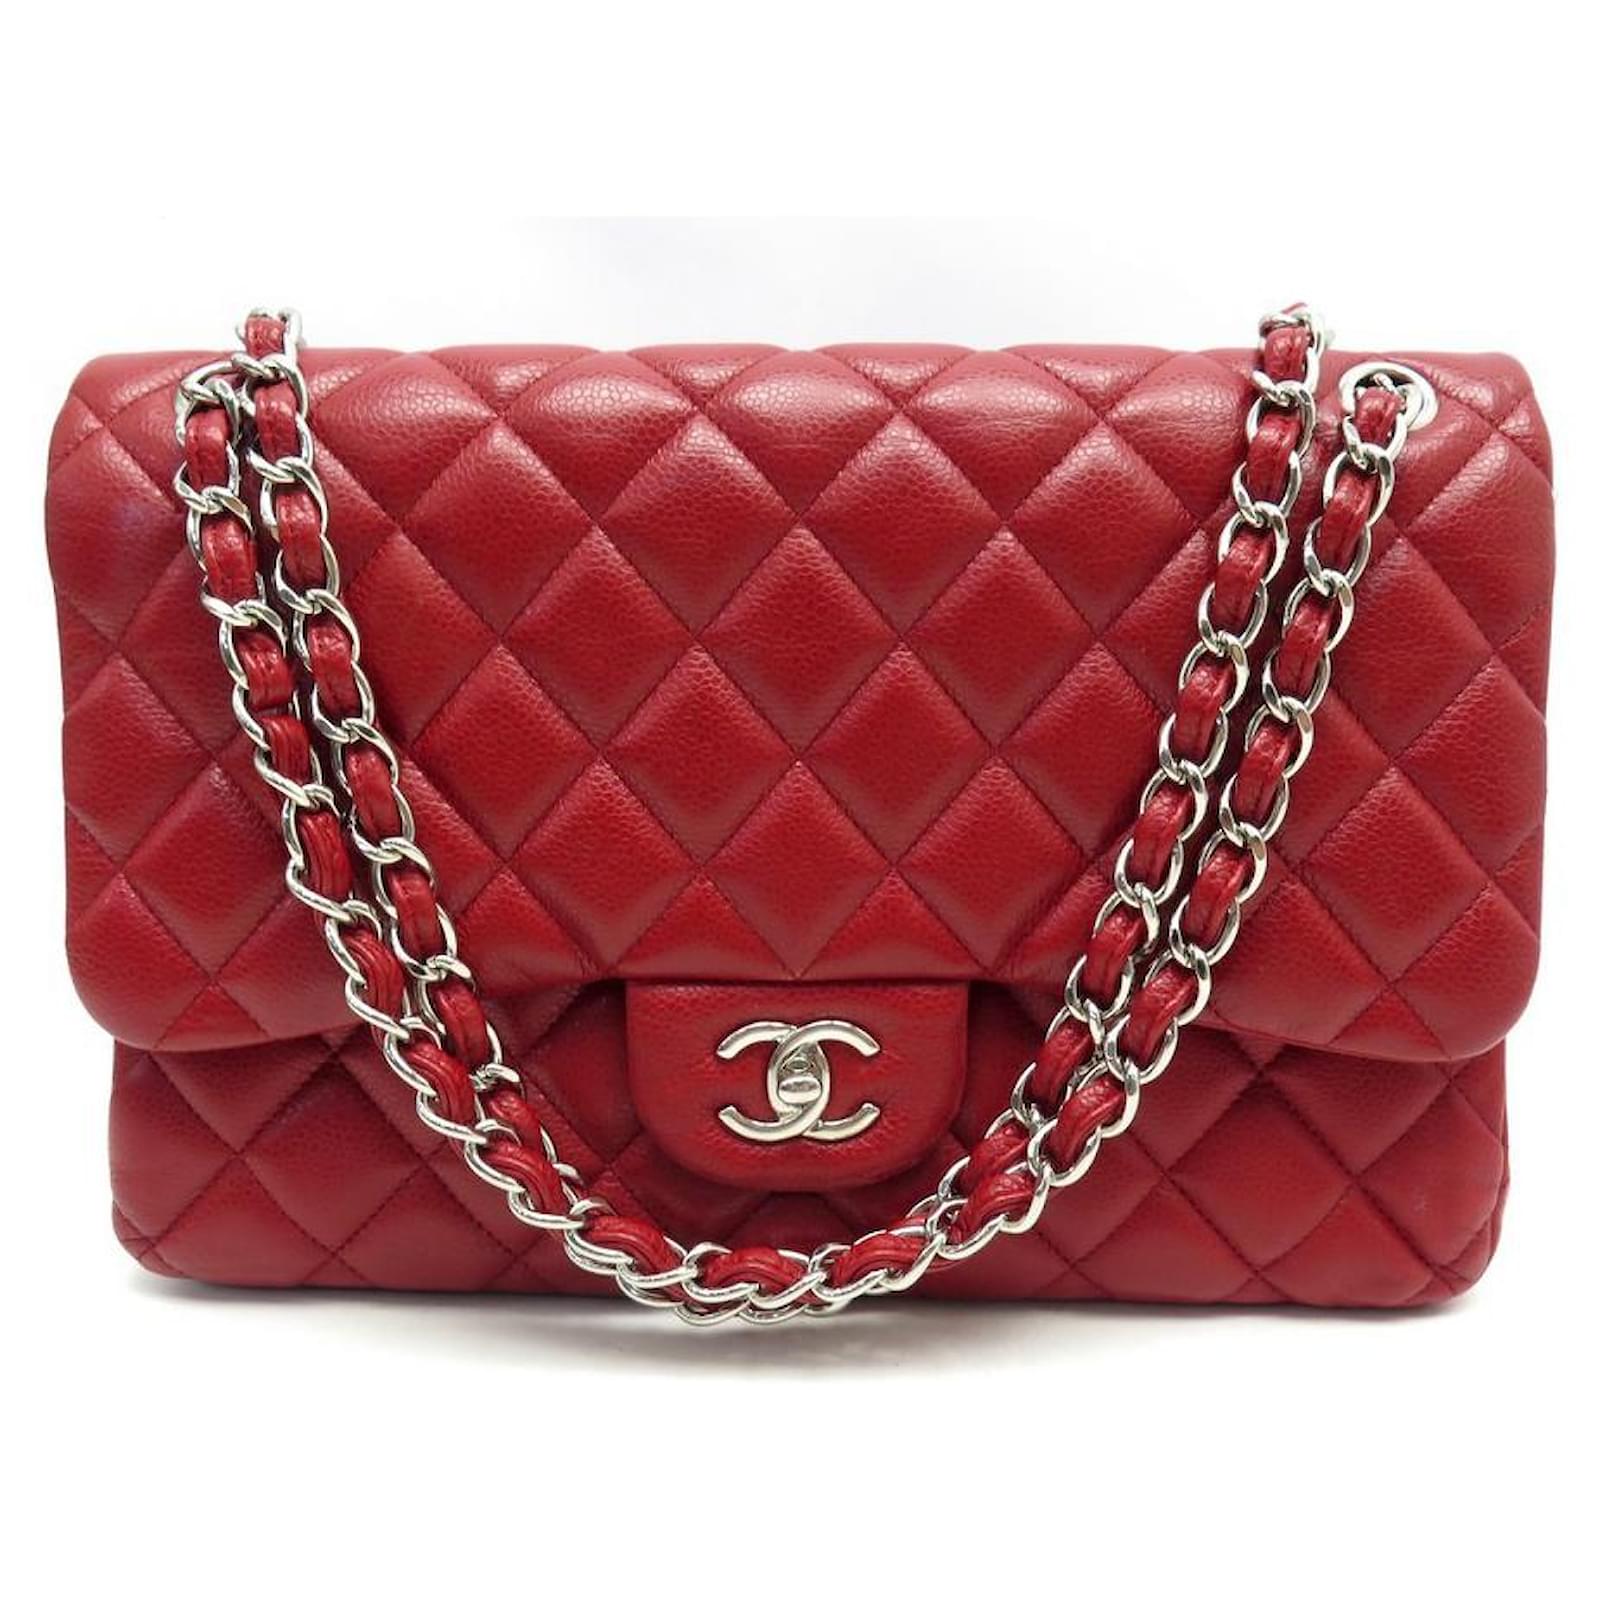 Chanel Light Orange Quilted Patent Leather Classic Jumbo Double Flap Bag